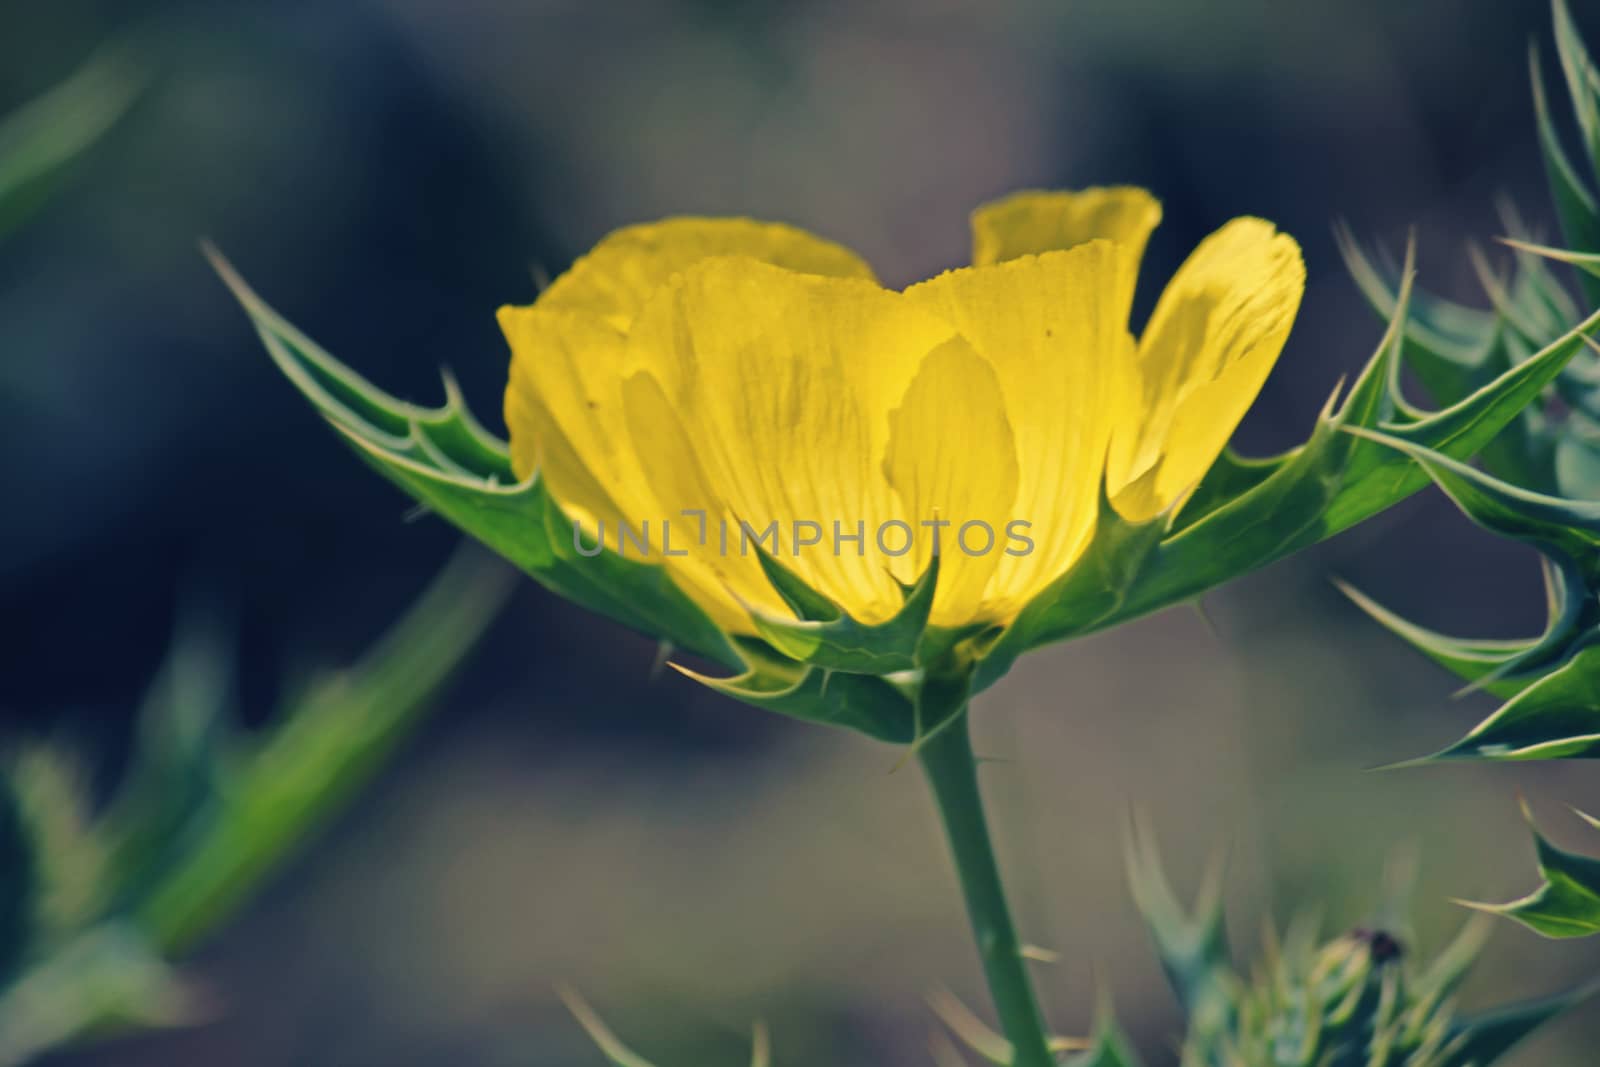 Argemone mexicana, Mexican poppy, Mexican prickly poppy, Flowering thistle is a species of poppy.